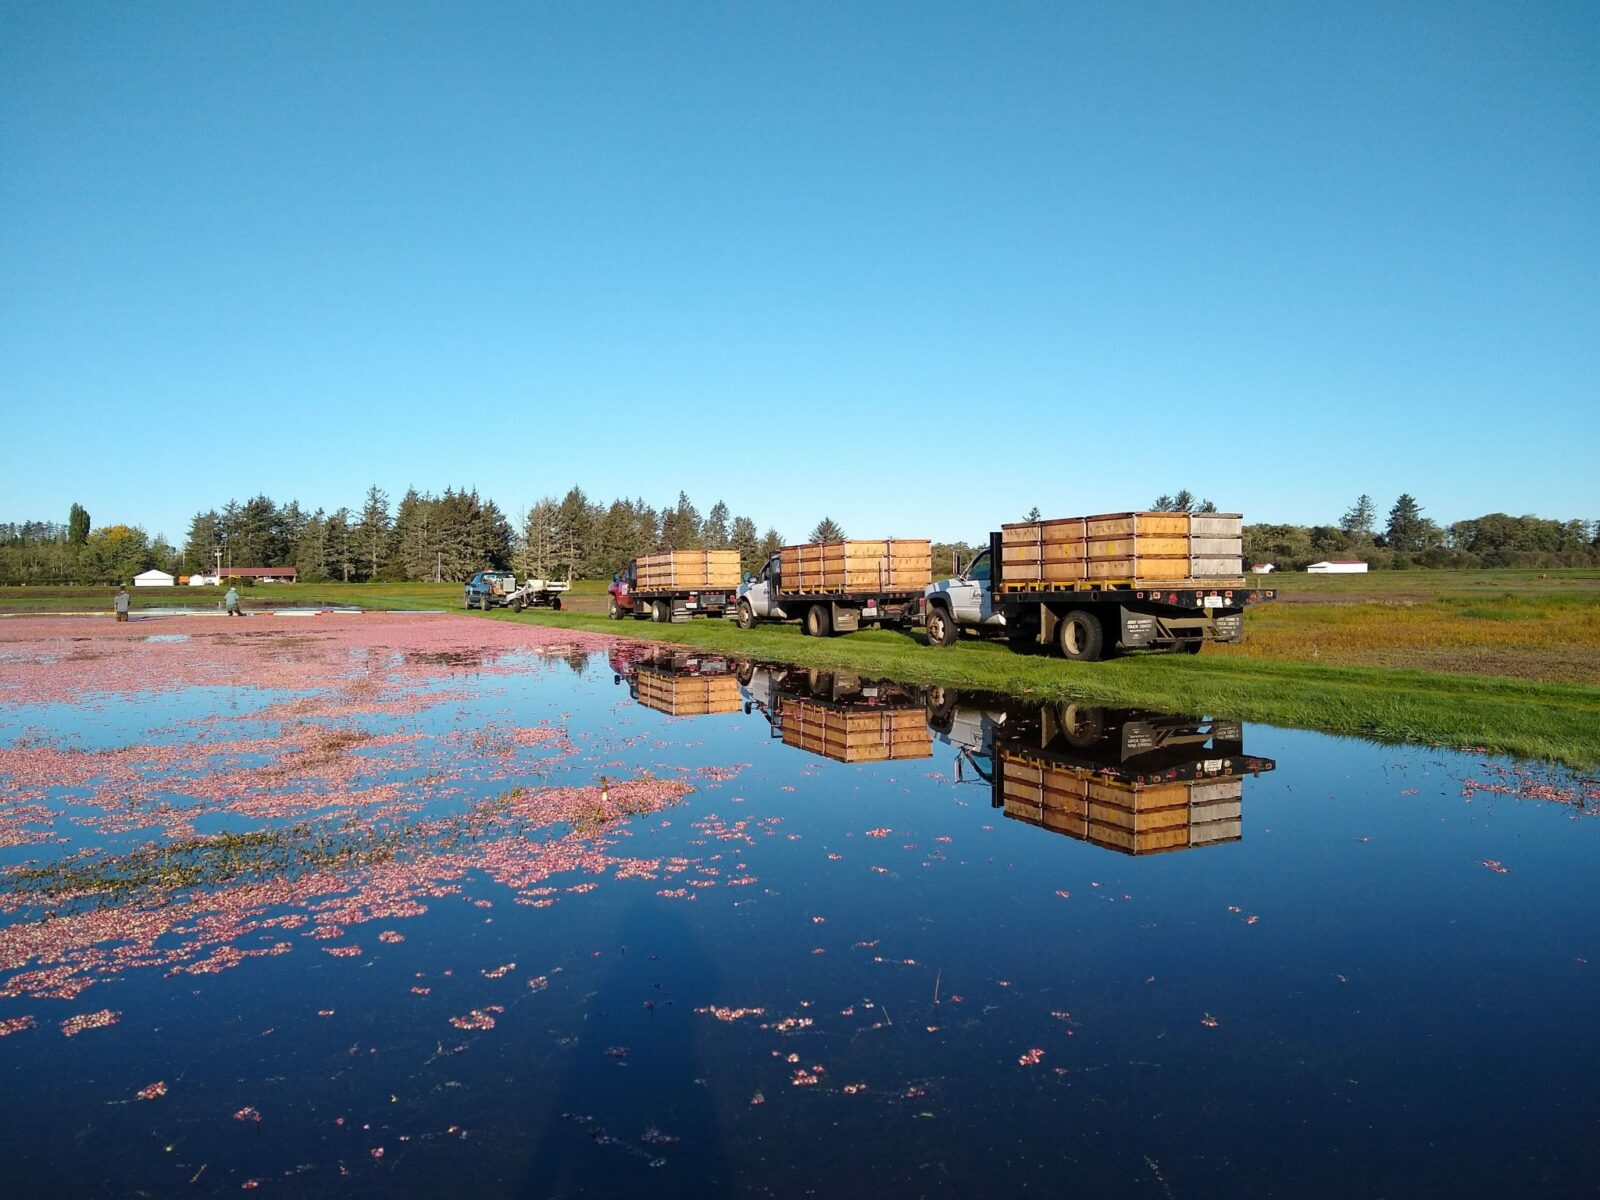 Flooded Washington cranberry bog being harvested. Cranberries are floating on the surface of the water and three large farm trucks are parked next to it